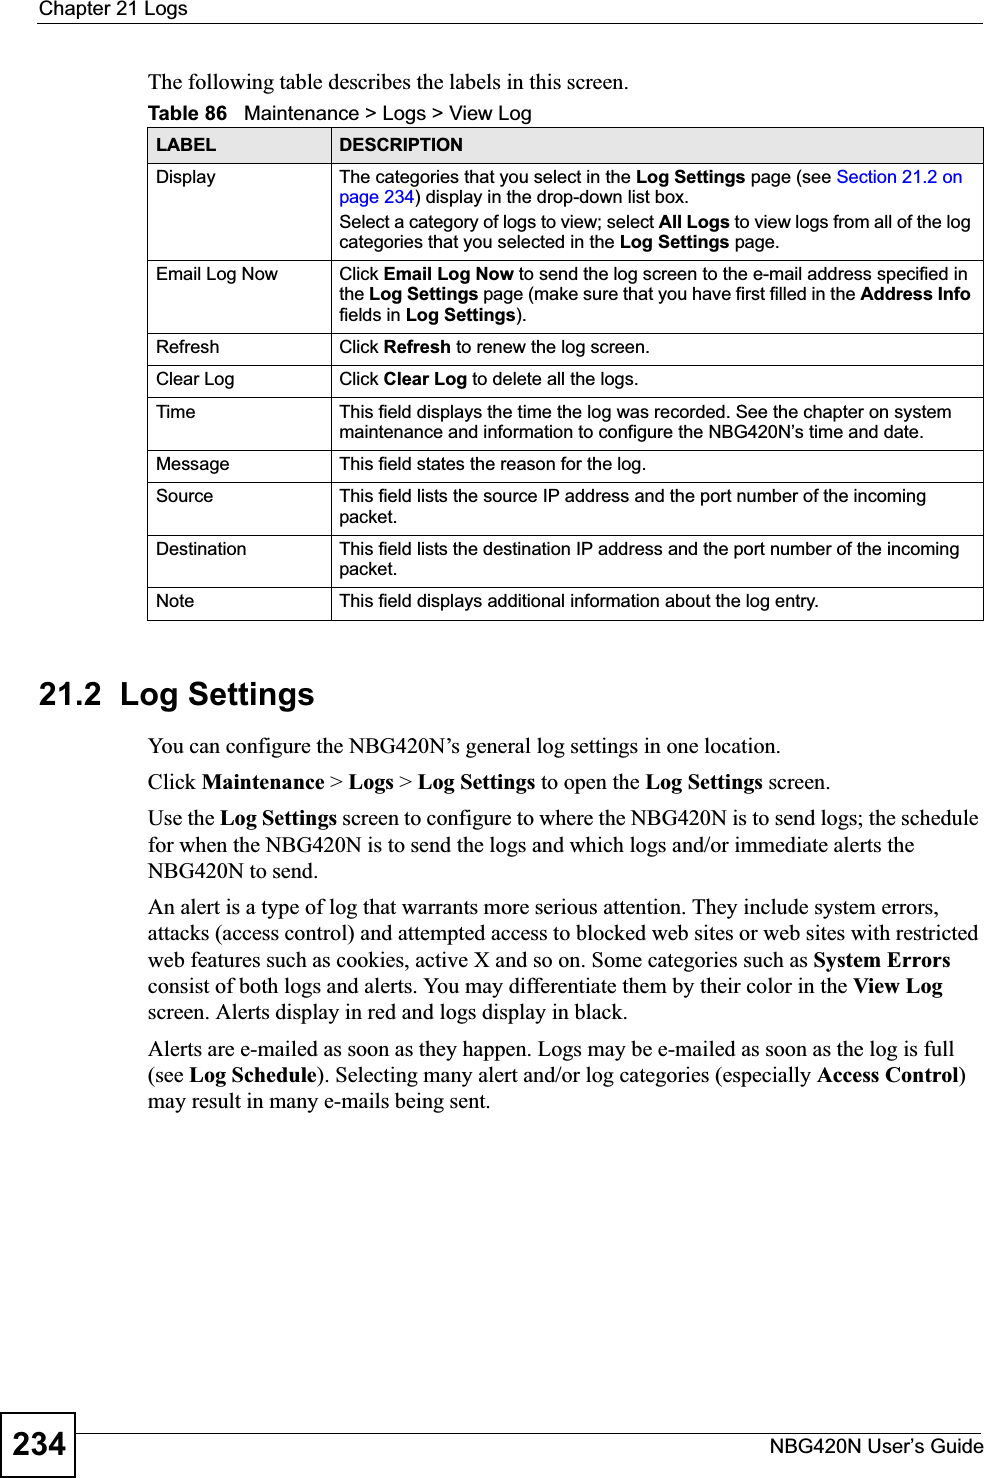 Chapter 21 LogsNBG420N User’s Guide234The following table describes the labels in this screen.21.2  Log SettingsYou can configure the NBG420N’s general log settings in one location.Click Maintenance &gt; Logs &gt; Log Settings to open the Log Settings screen.Use the Log Settings screen to configure to where the NBG420N is to send logs; the schedule for when the NBG420N is to send the logs and which logs and/or immediate alerts the NBG420N to send.An alert is a type of log that warrants more serious attention. They include system errors, attacks (access control) and attempted access to blocked web sites or web sites with restricted web features such as cookies, active X and so on. Some categories such as System Errorsconsist of both logs and alerts. You may differentiate them by their color in the View Log screen. Alerts display in red and logs display in black.Alerts are e-mailed as soon as they happen. Logs may be e-mailed as soon as the log is full (see Log Schedule). Selecting many alert and/or log categories (especially Access Control)may result in many e-mails being sent.Table 86   Maintenance &gt; Logs &gt; View LogLABEL DESCRIPTIONDisplay  The categories that you select in the Log Settings page (see Section 21.2 on page 234) display in the drop-down list box.Select a category of logs to view; select All Logs to view logs from all of the log categories that you selected in the Log Settings page. Email Log Now  Click Email Log Now to send the log screen to the e-mail address specified in the Log Settings page (make sure that you have first filled in the Address Infofields in Log Settings).Refresh Click Refresh to renew the log screen. Clear Log  Click Clear Log to delete all the logs. Time  This field displays the time the log was recorded. See the chapter on system maintenance and information to configure the NBG420N’s time and date.Message This field states the reason for the log.Source This field lists the source IP address and the port number of the incoming packet.Destination  This field lists the destination IP address and the port number of the incoming packet.Note This field displays additional information about the log entry. 